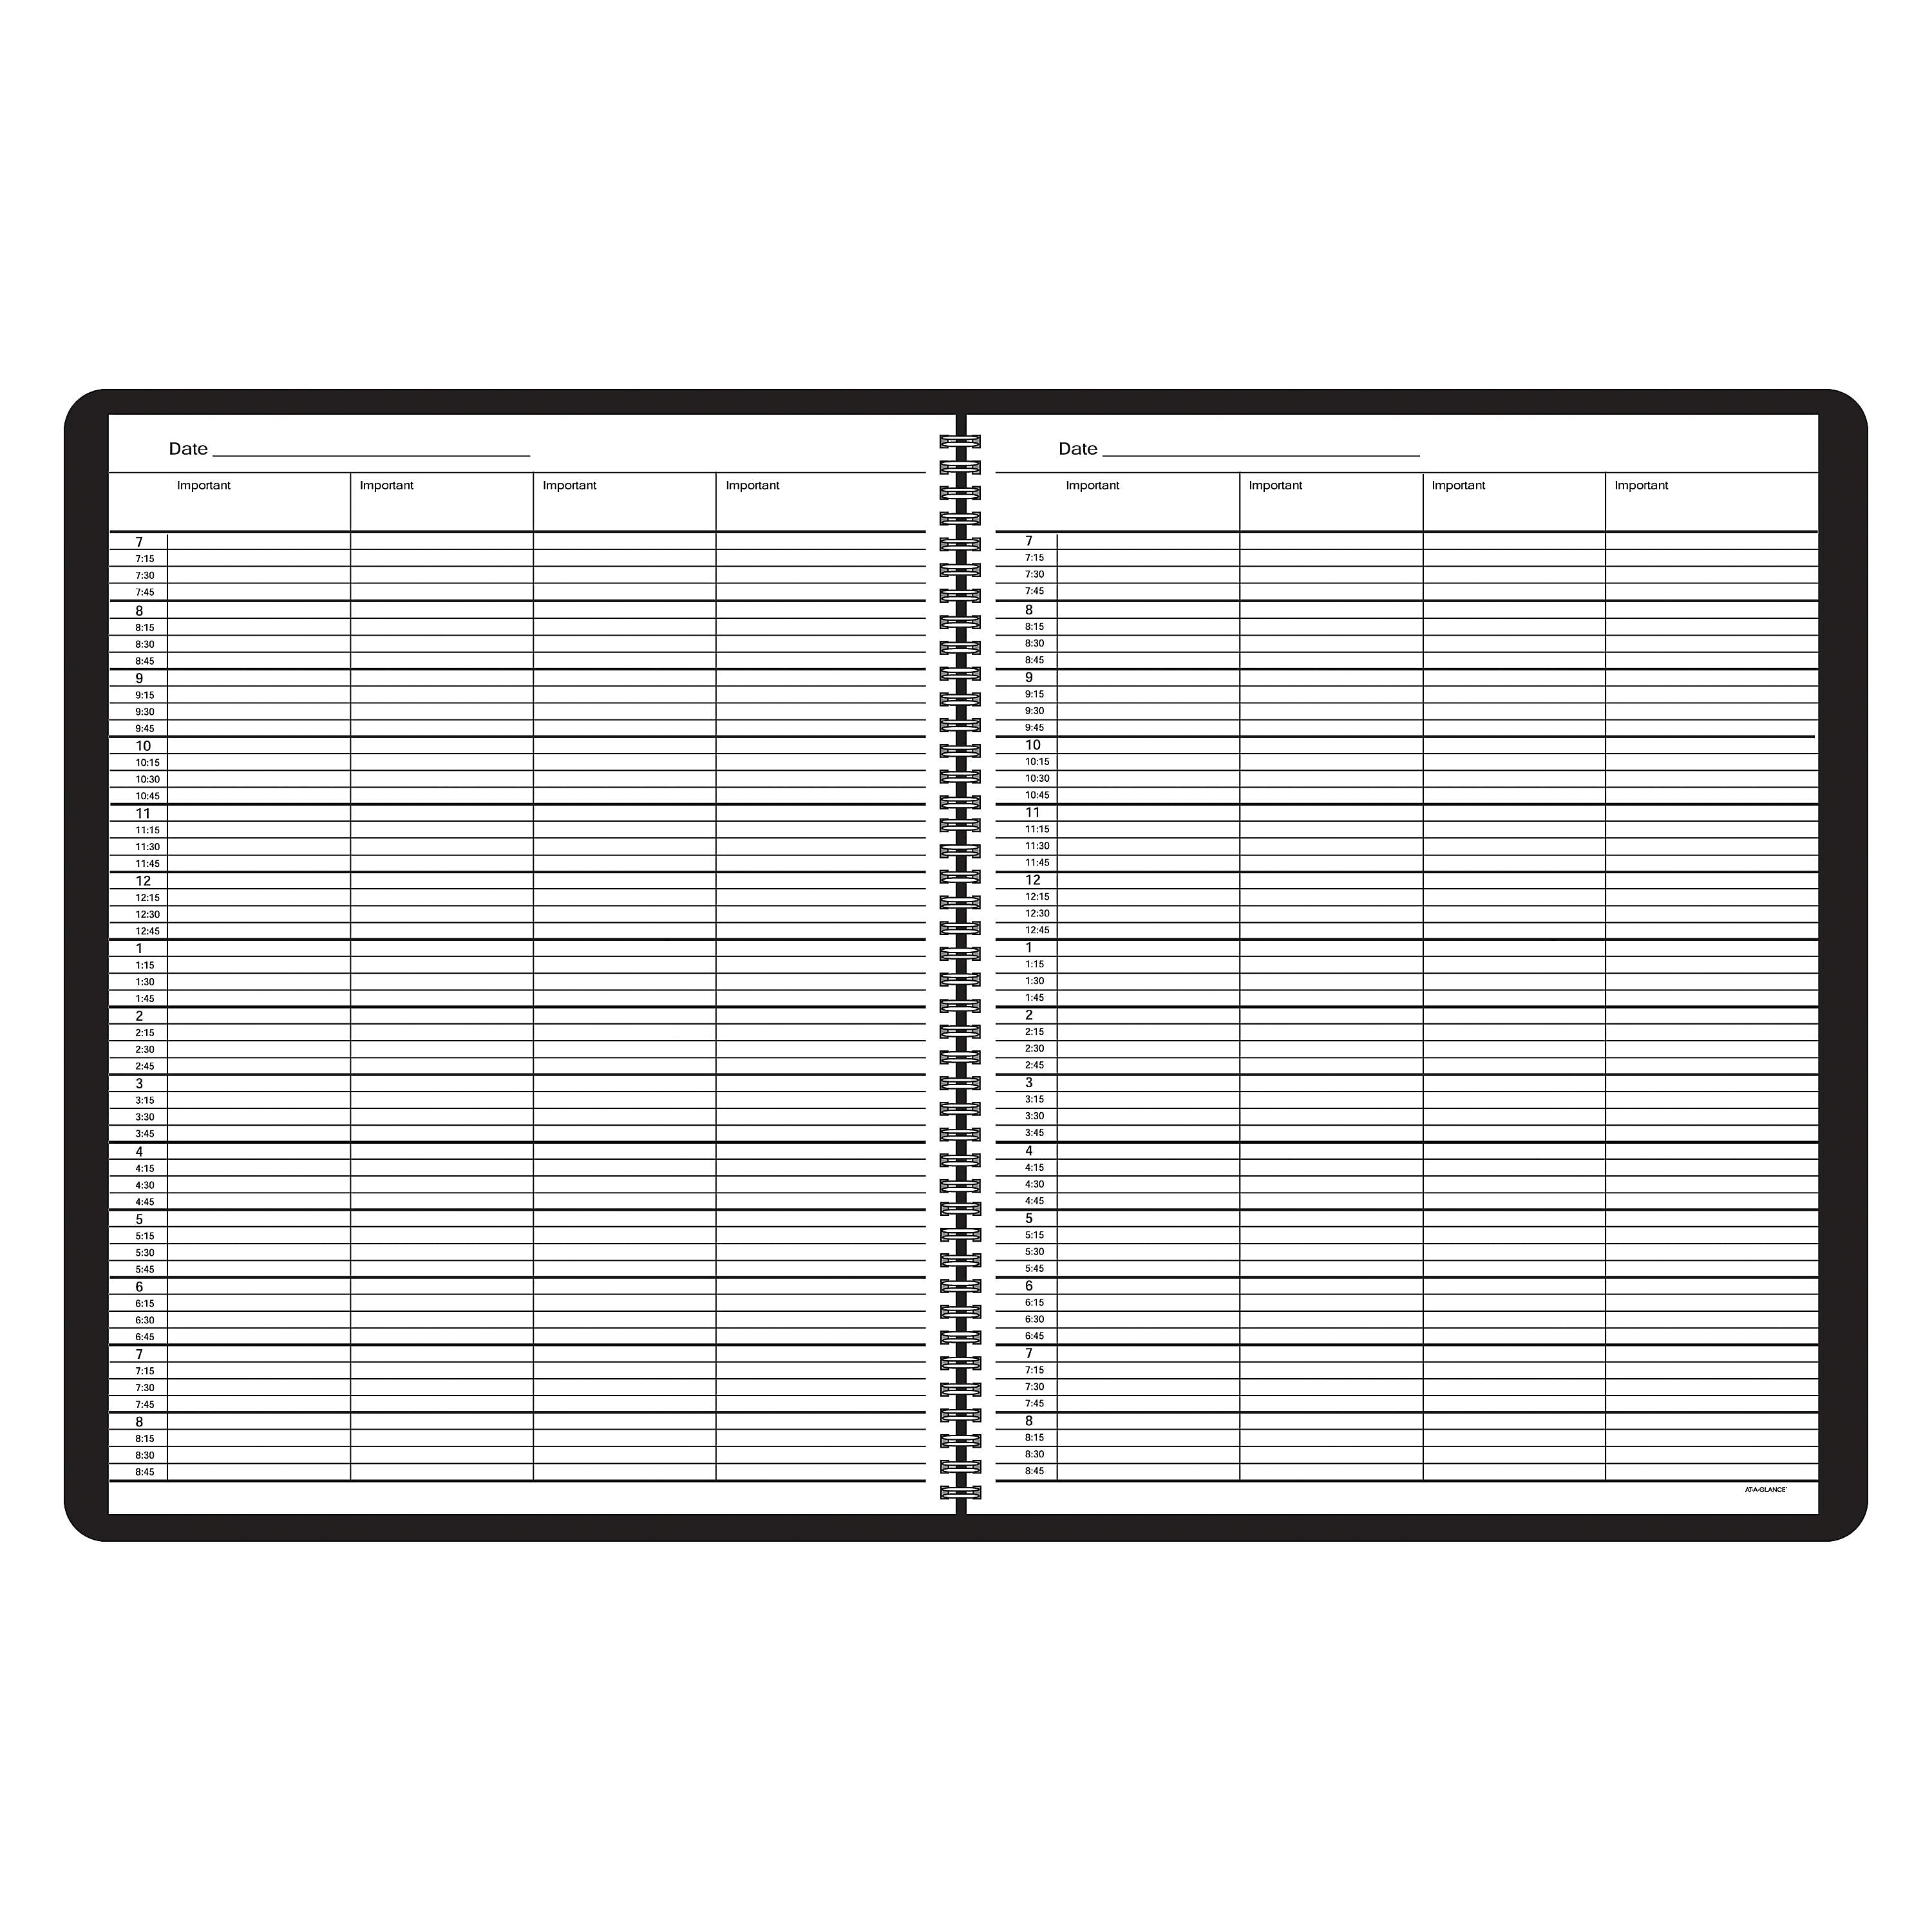 AT-A-GLANCE Four-Person Group 8.5" x 10.875" Daily Appointment Book, Black